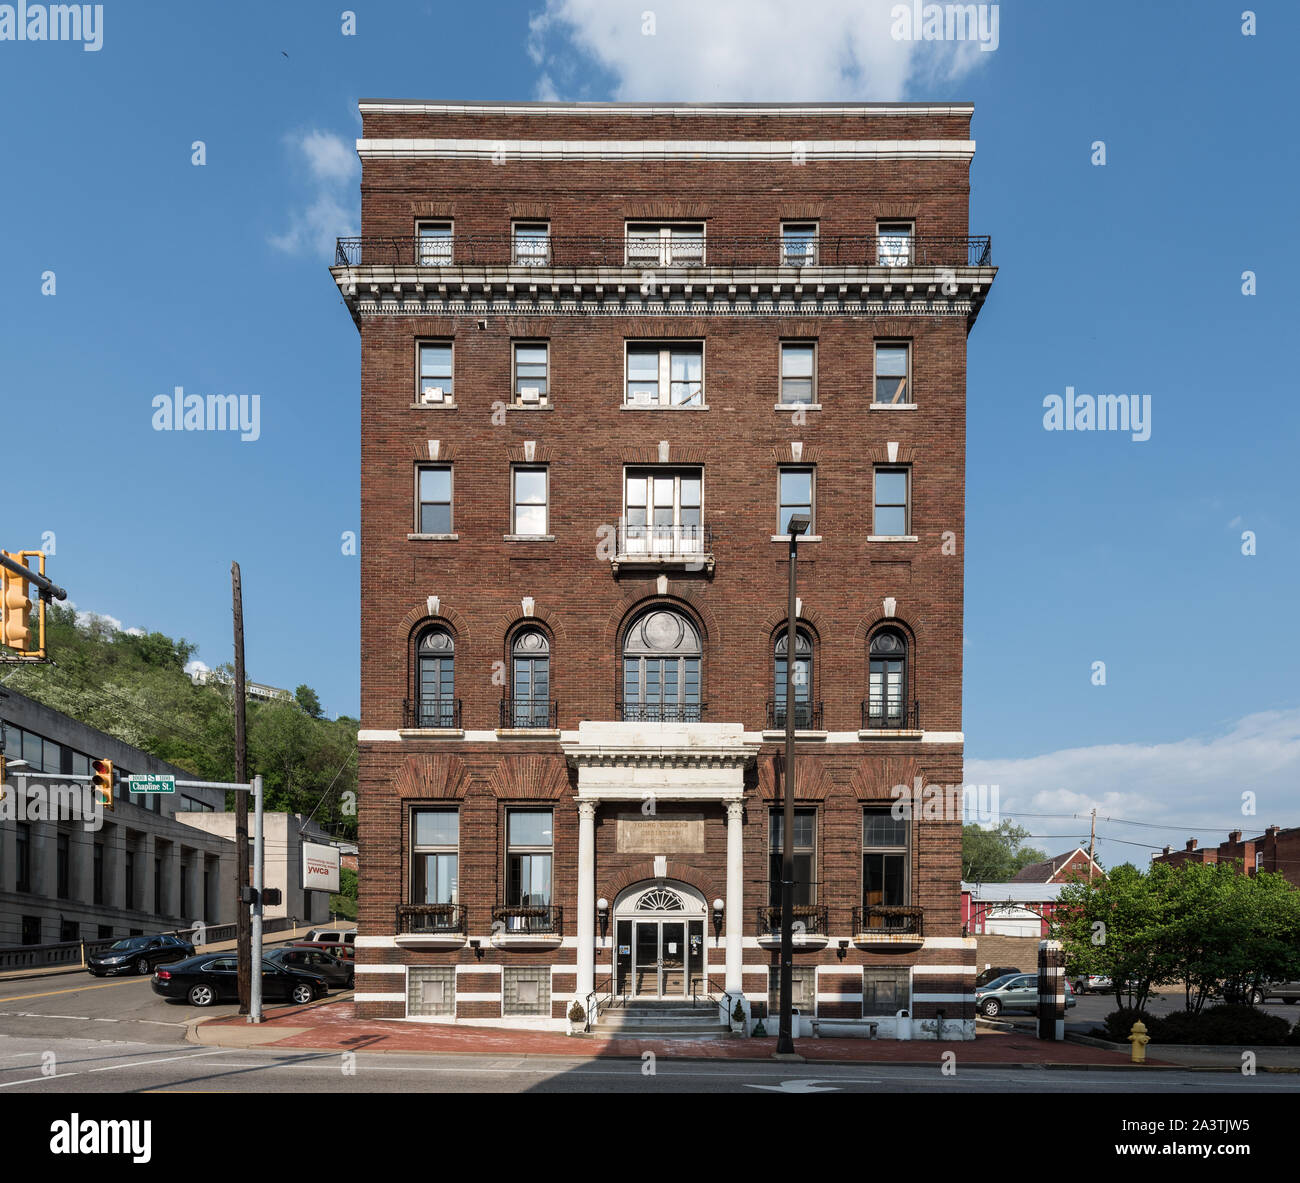 The 1915 Young Women's Christian Association (YWCA) Building in downtown Wheeling, West Virginia Stock Photo